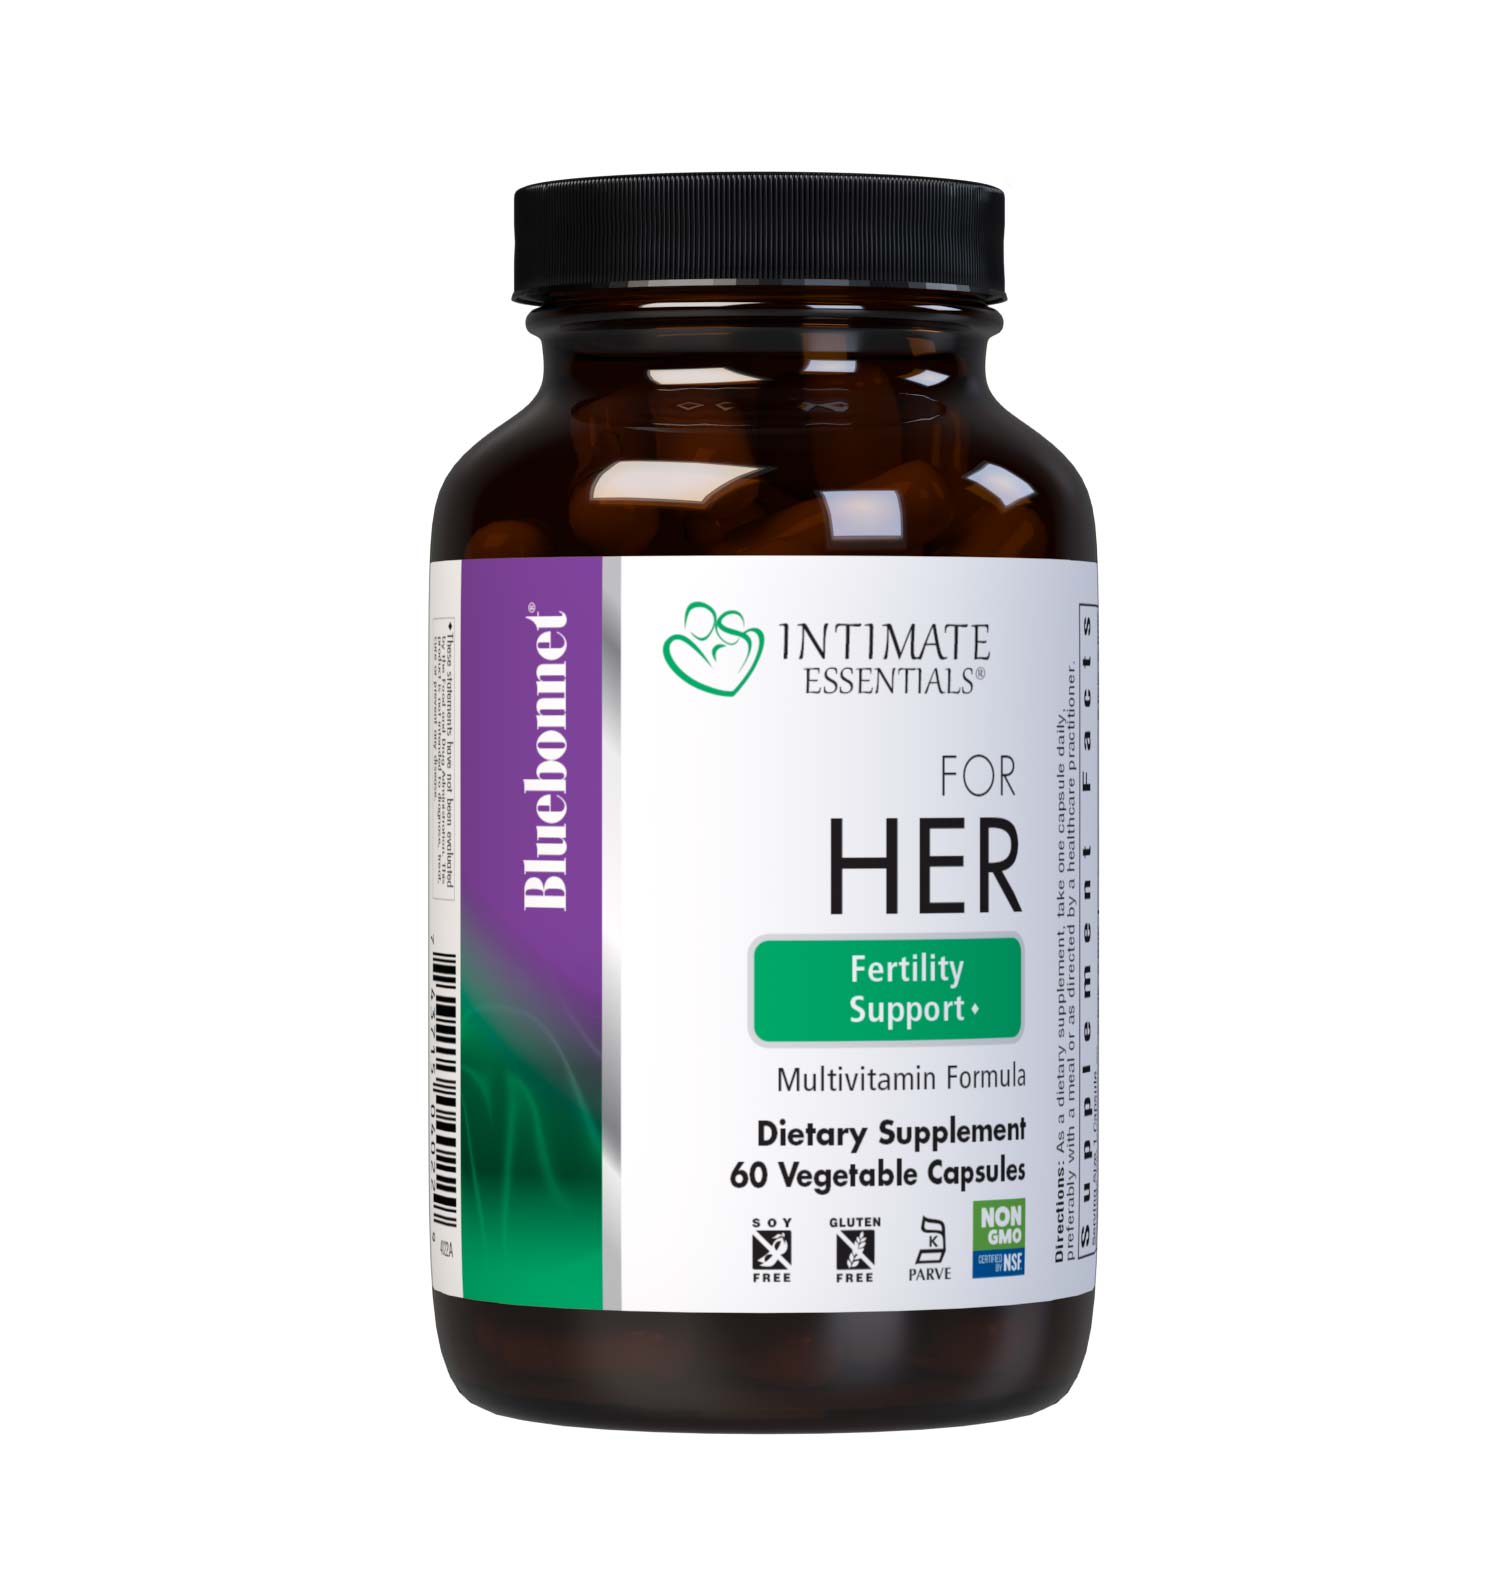 Bluebonnet’s Intimate Essentials Fertility For HER Whole Food-Based Multiple 60 Vegetable Capsules are specially formulated to help support a woman’s optimal reproductive health and wellness with a complementary combination of vitamins, minerals and botanicals. #size_60 count